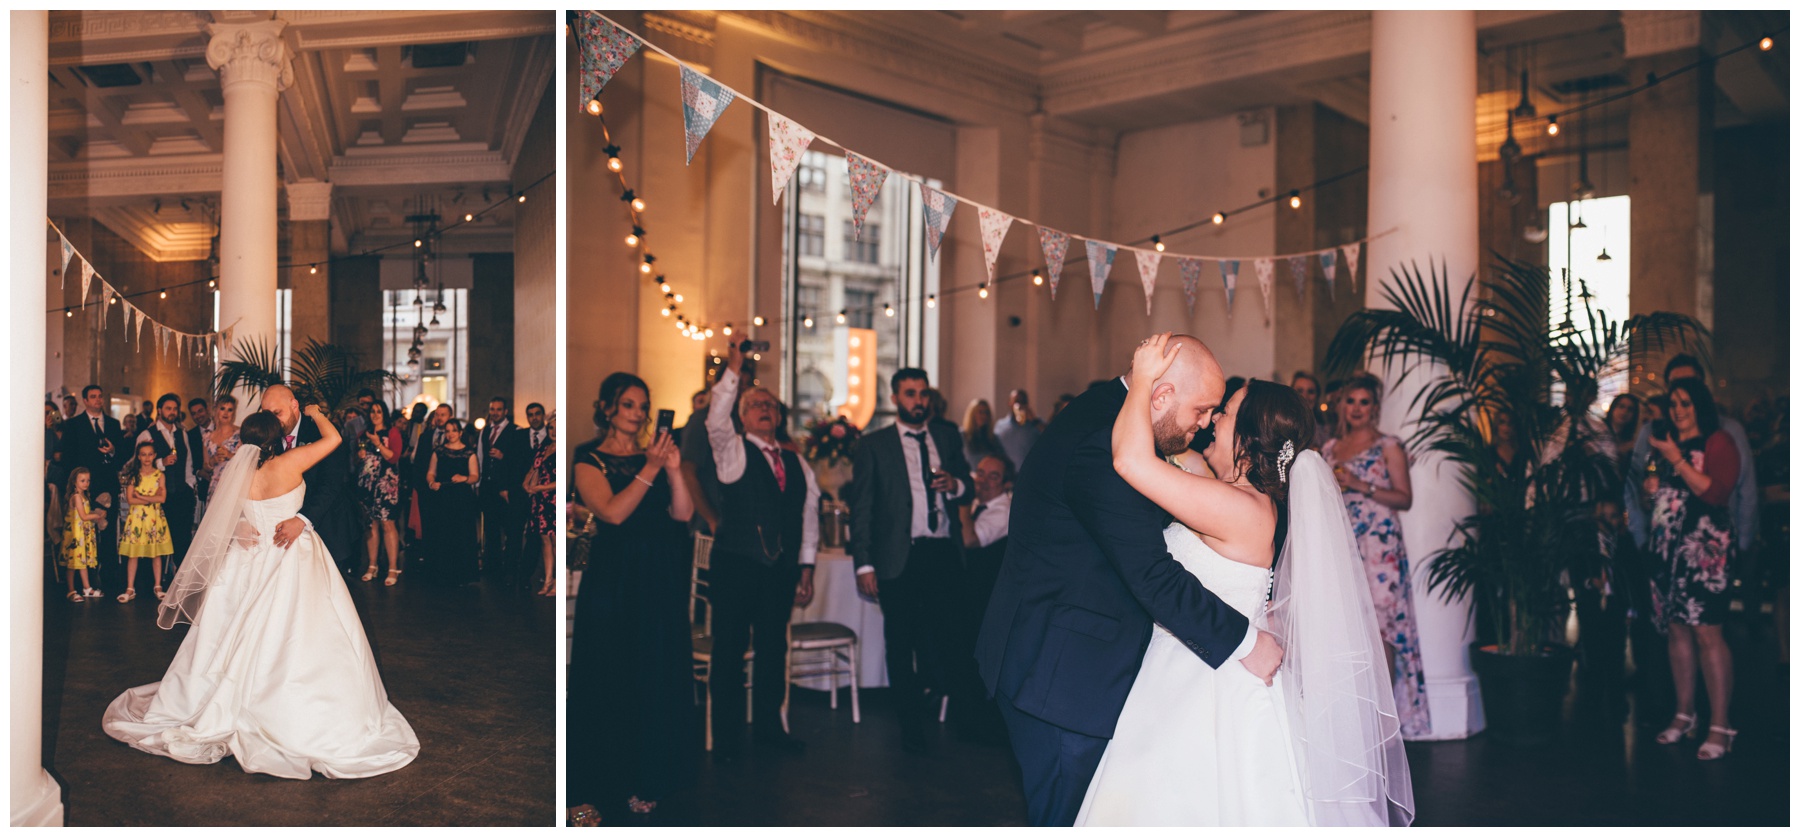 First Dance at Oh Me Oh My in Liverpool.